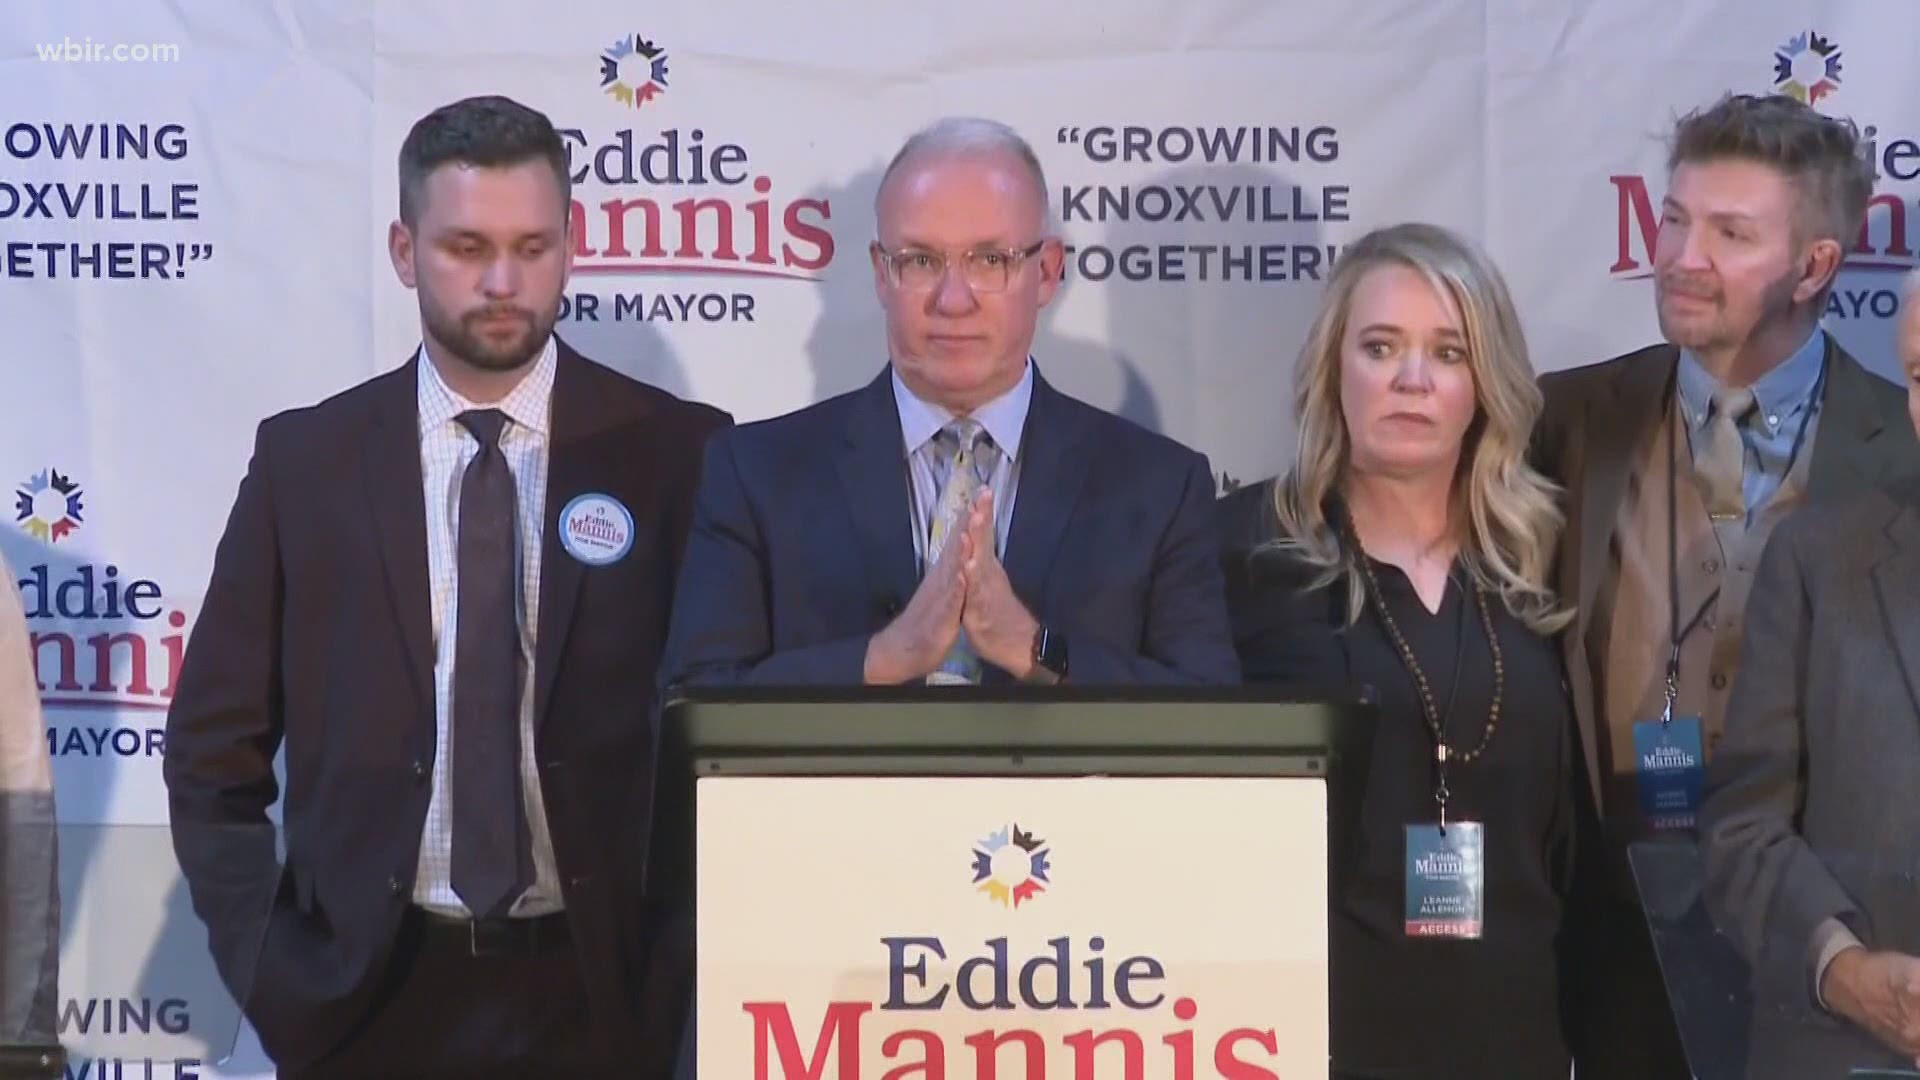 Mannis said he is trying to change the conversation around LGBTQ+ issues as he makes history as the first openly gay, republican state lawmaker in Tennessee.